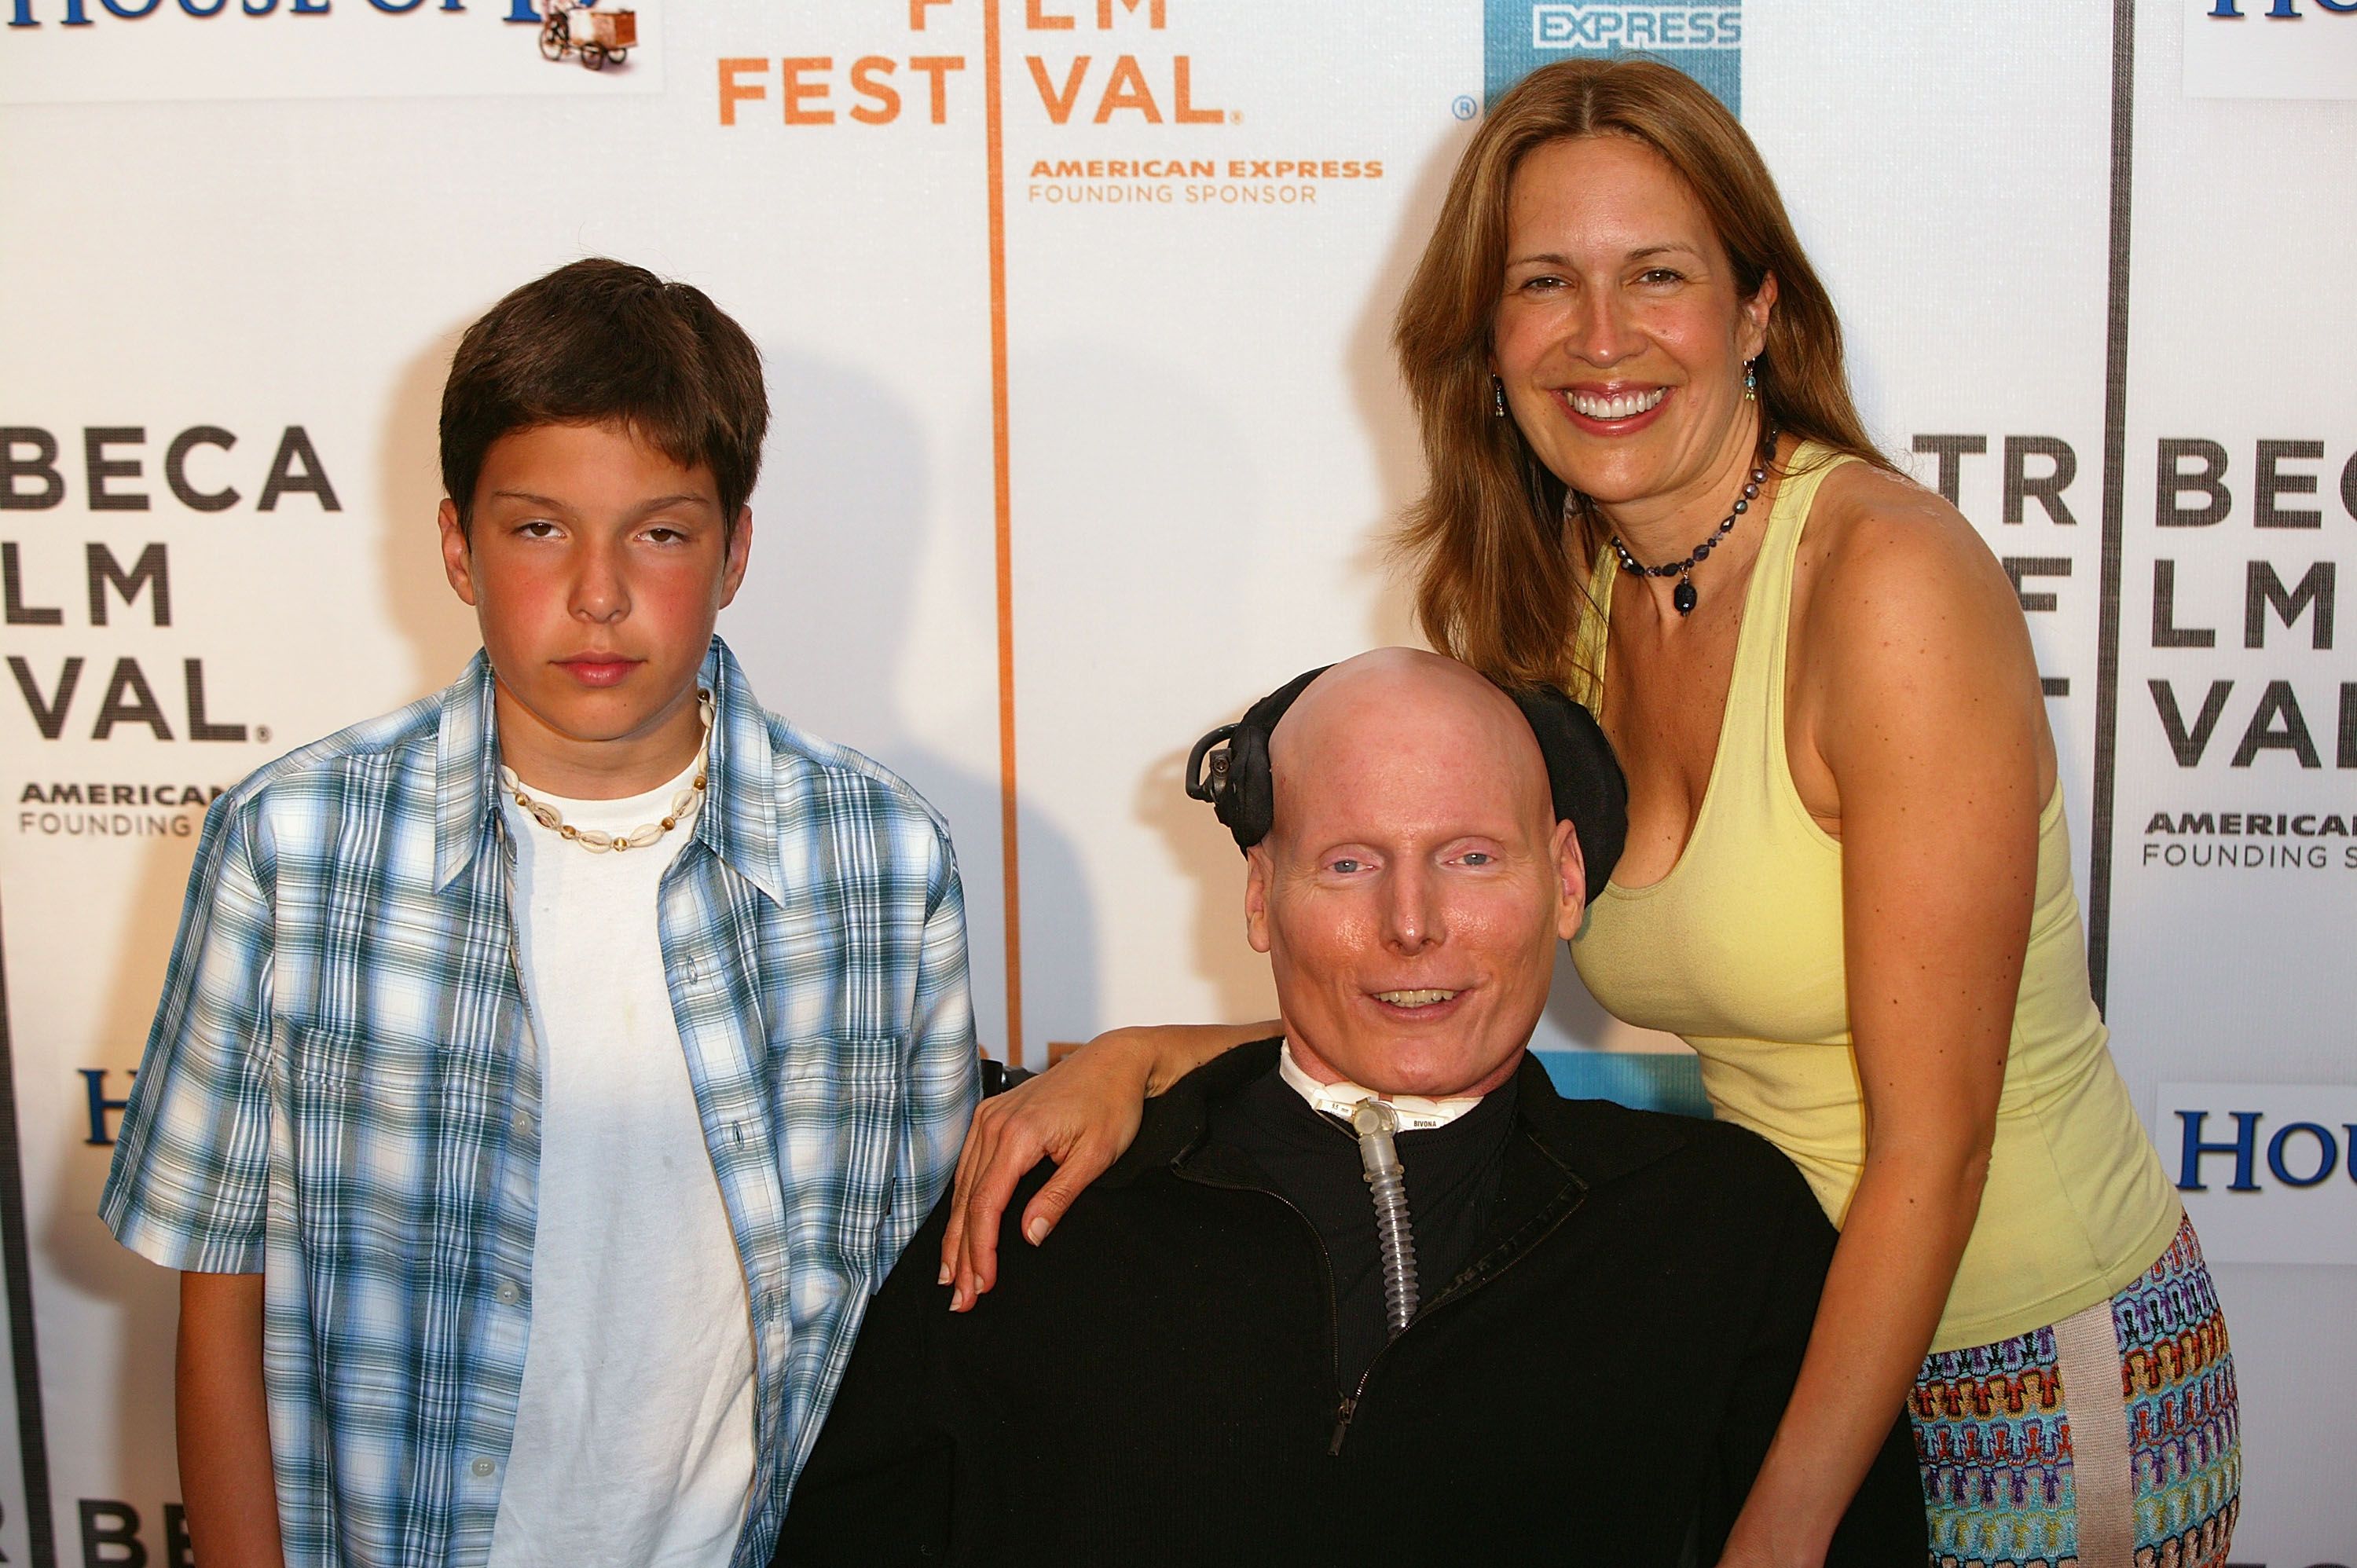 Christopher, Dana, and William Reeve at the screening of "House Of D" during the Tribeca Film Festival on May 7, 2004, in New York City | Photo: Matthew Peyton/Getty Images